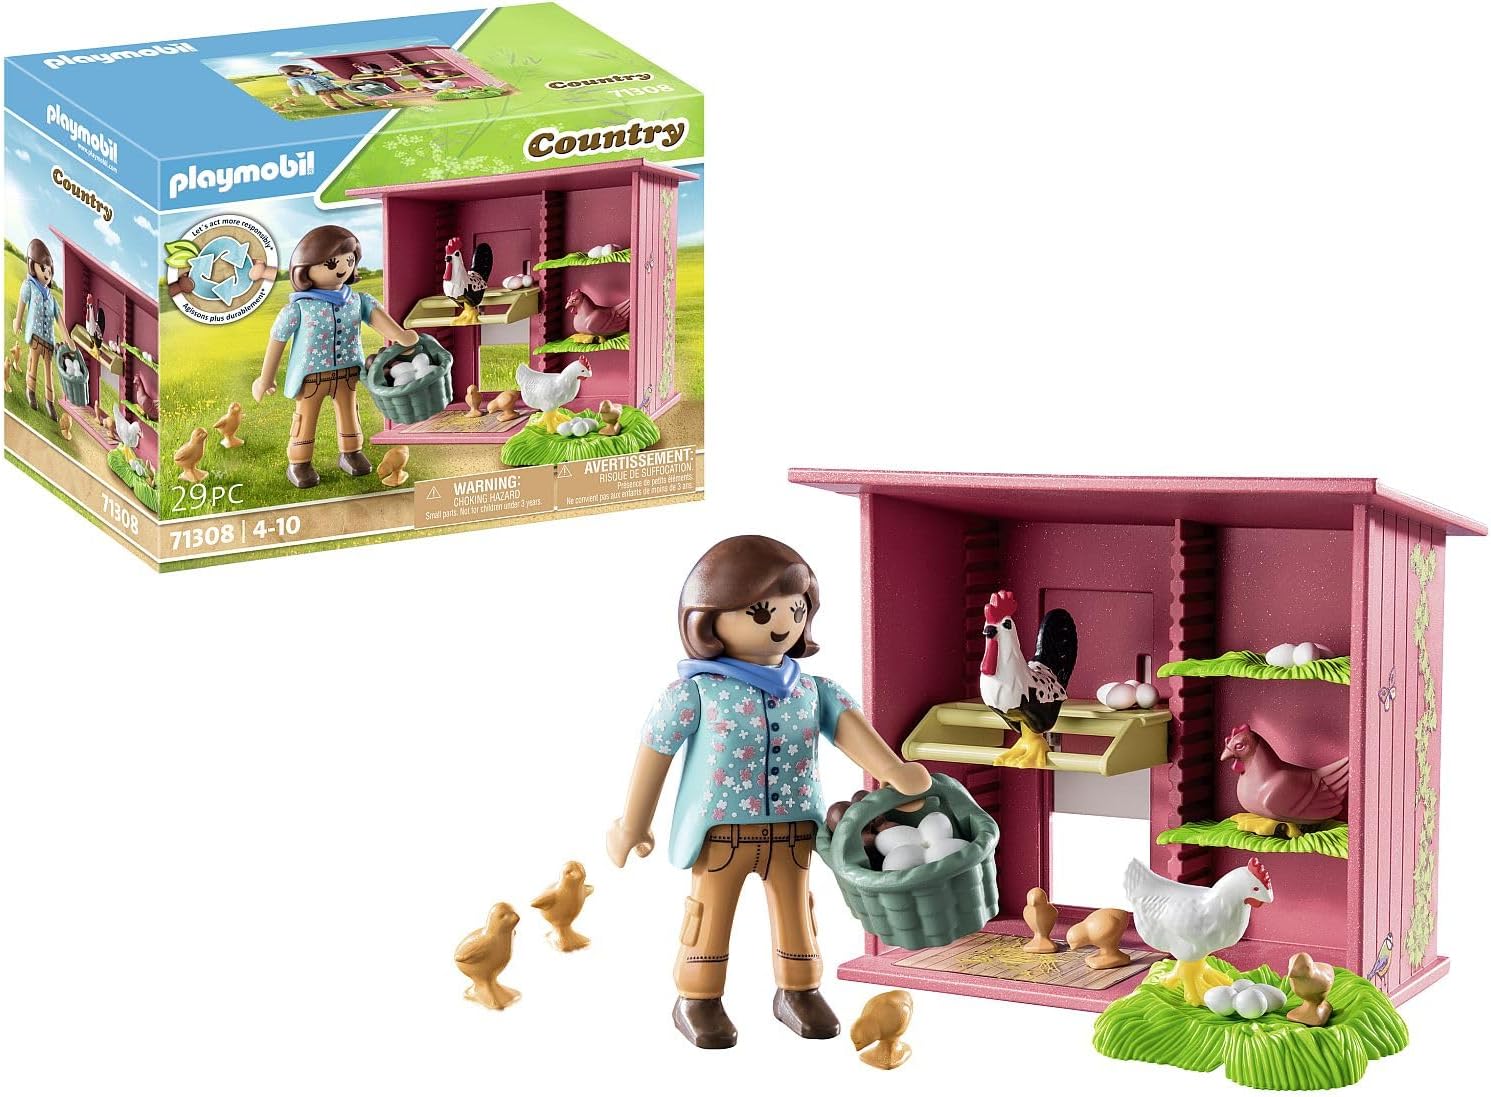 PLAYMOBIL Country 71308 Chickens with Chick, Colourful Chicken Family for Your Farm, Chicken Coop with Rooster, Hens and Chicks, Toy for Children from 4 Years